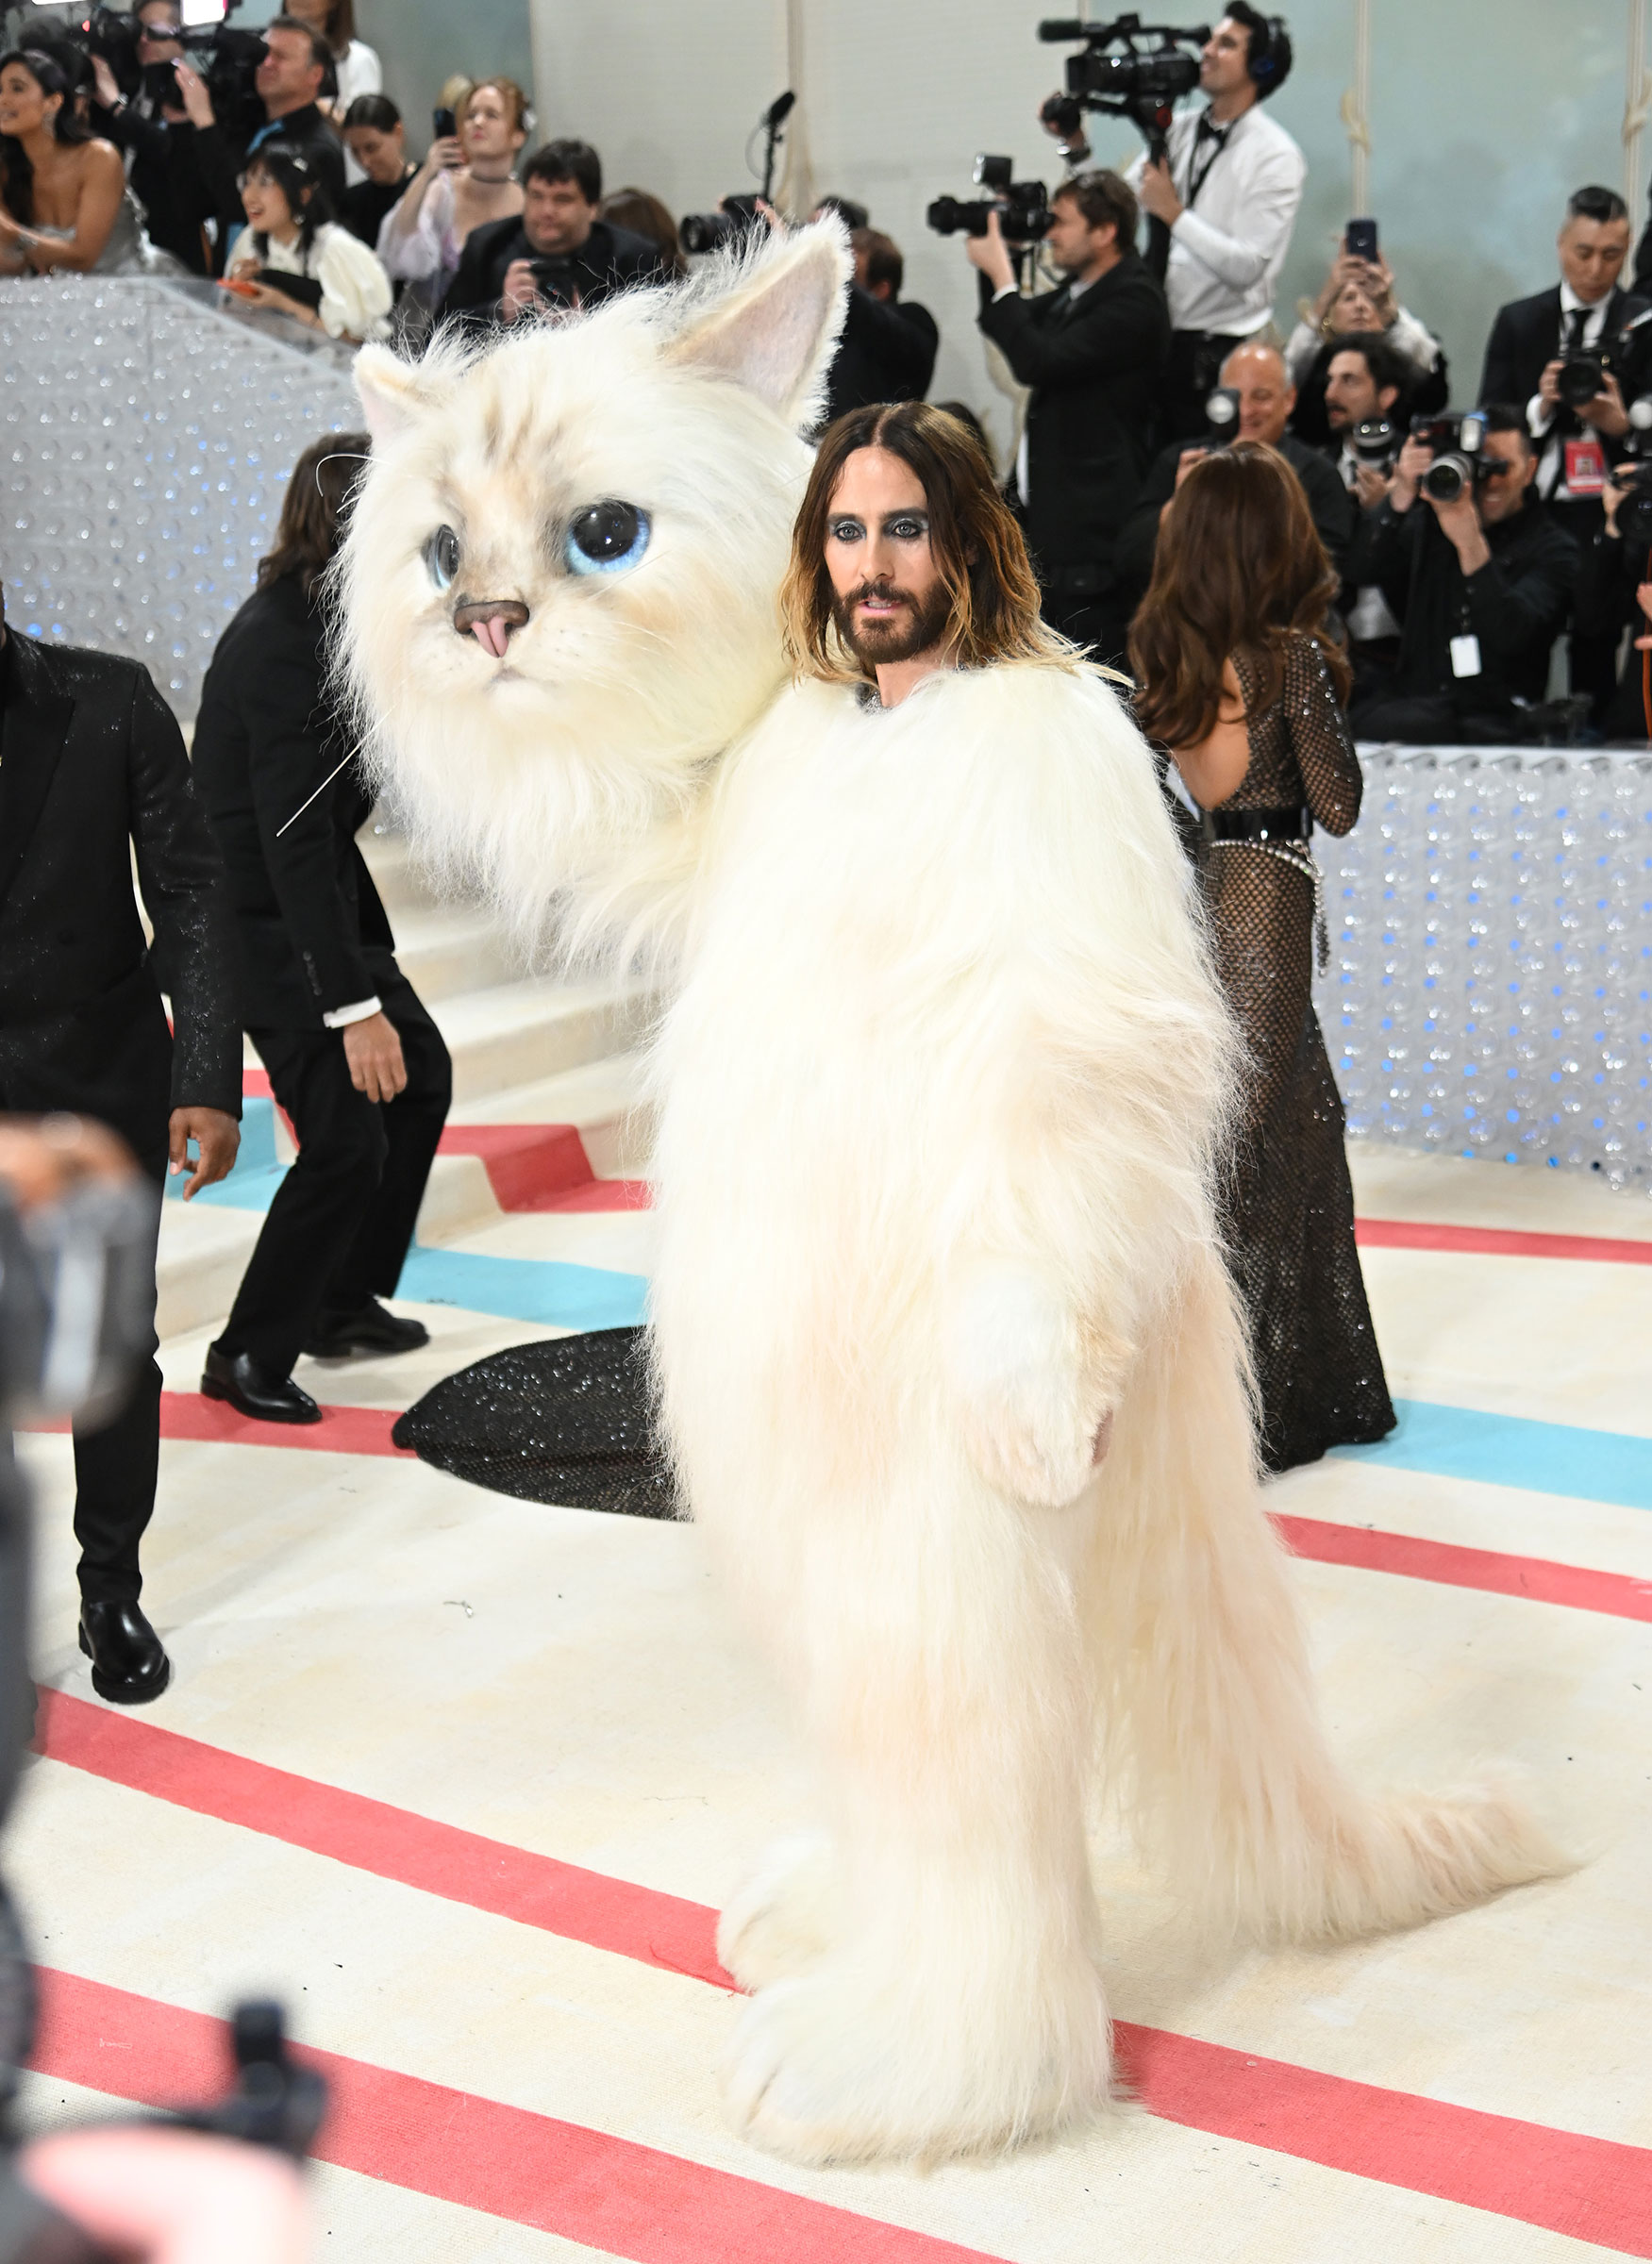 Jared Leto (Noam Galai—GA/The Hollywood Reporter/Getty Images)